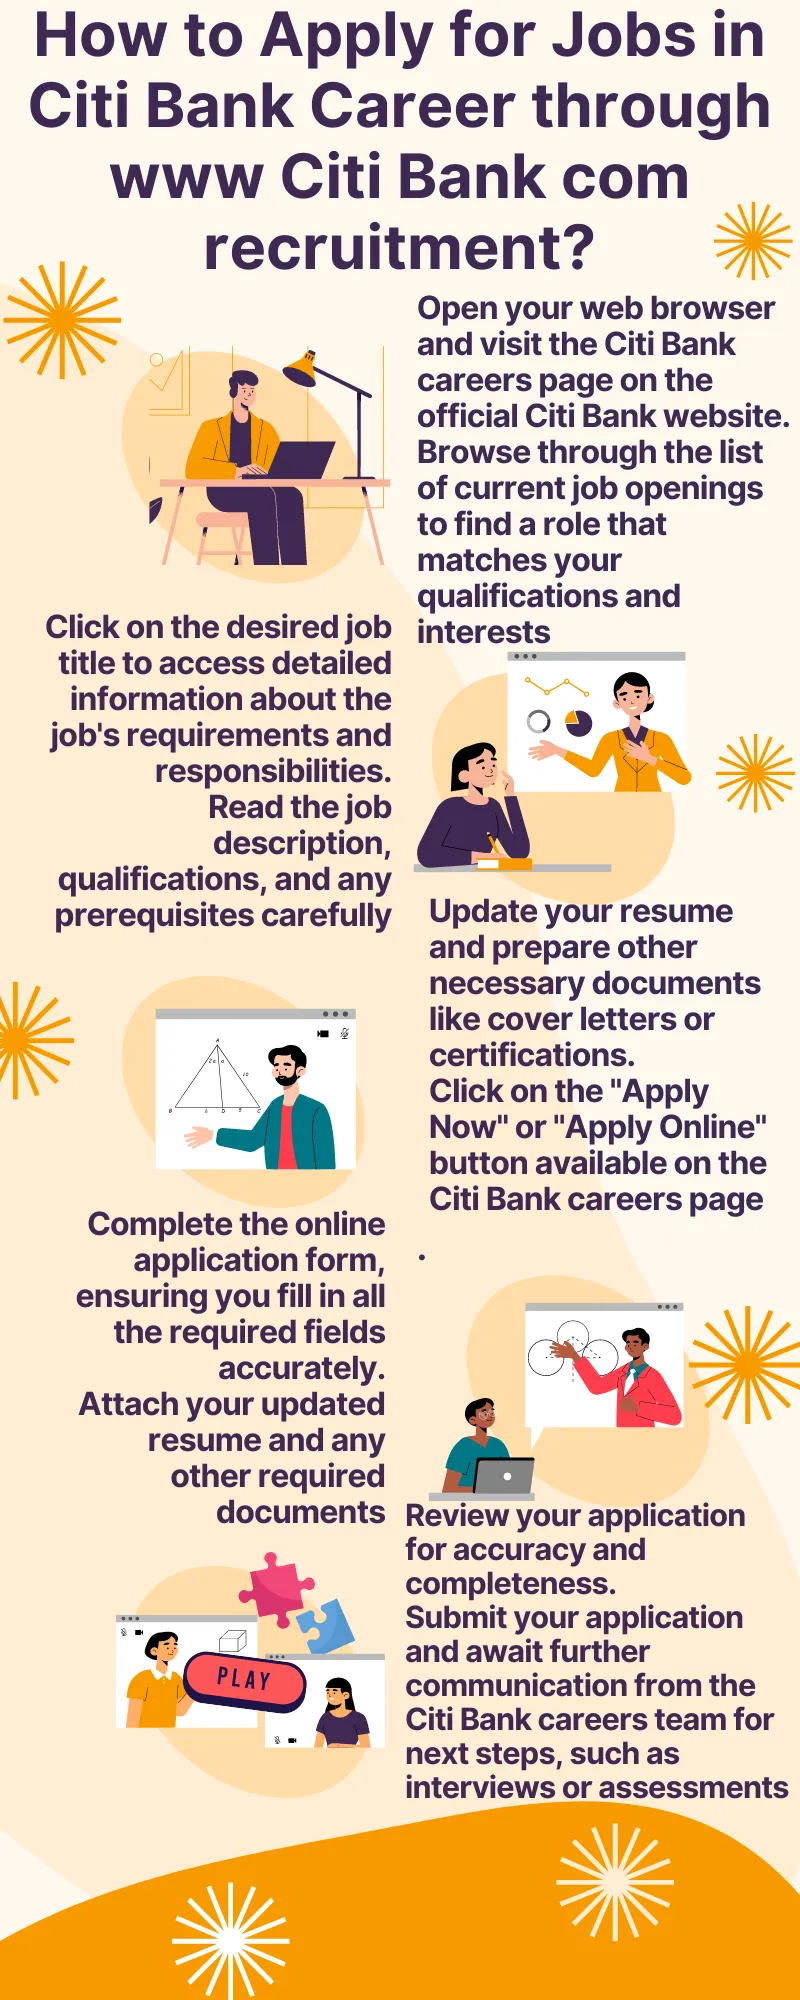 How to Apply for Jobs in Citi Bank Career through www Citi Bank com recruitment 1